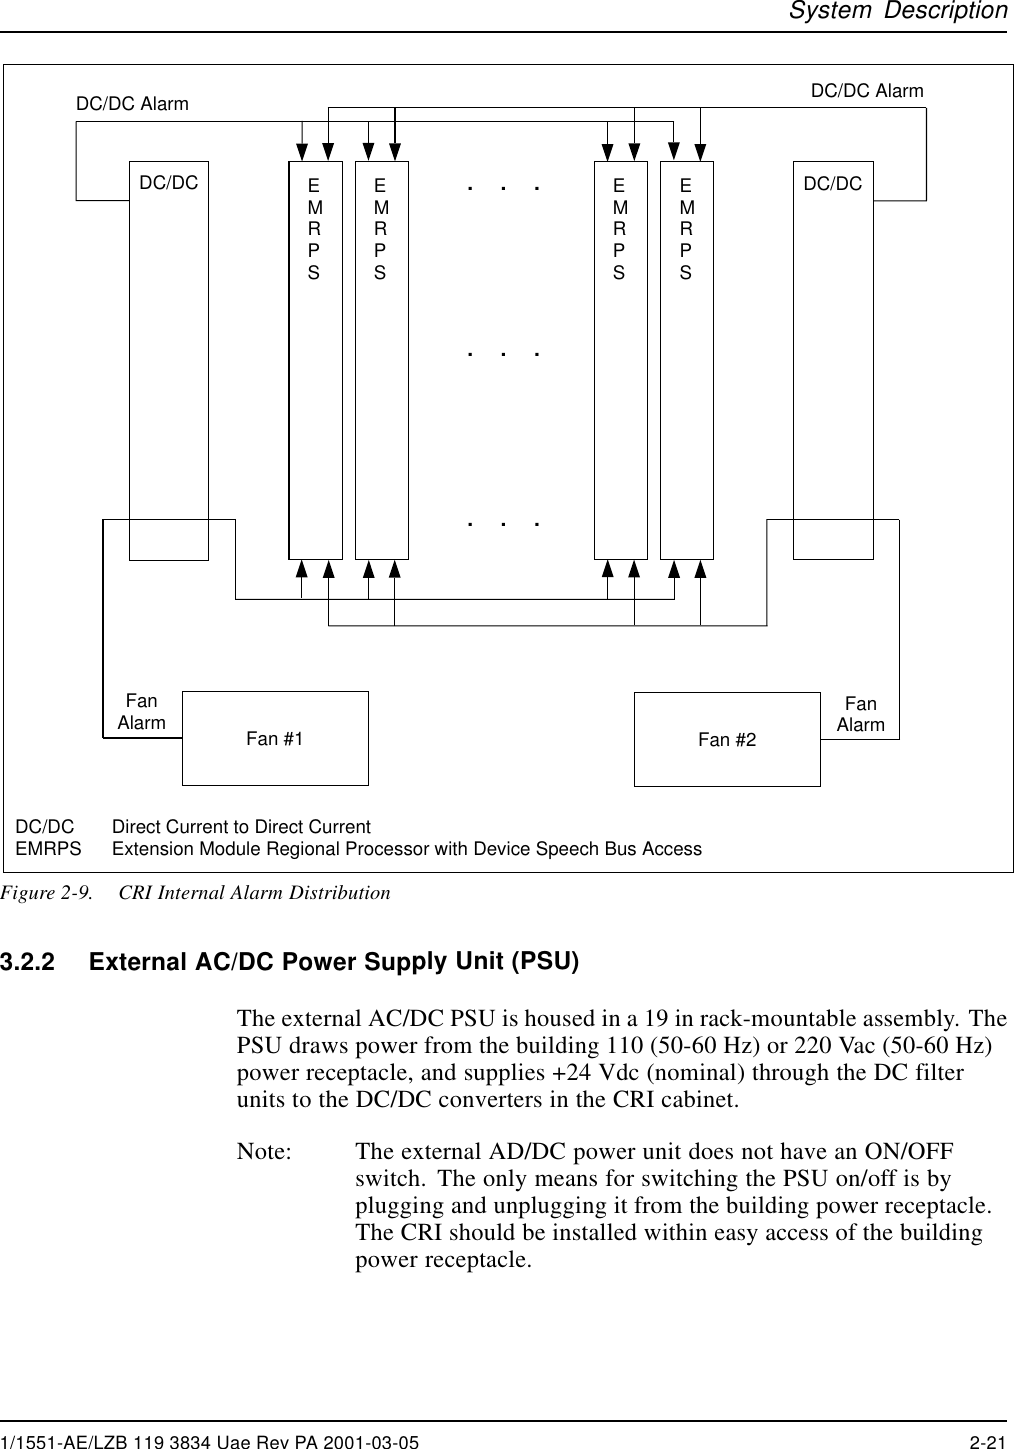 System DescriptionDC/DC AlarmDC/DC DC/DCDC/DC AlarmFanAlarm Fan #1FanAlarmFan #2.   .   ..   .   ..   .   .EMRPSEMRPSEMRPSEMRPSDC/DCEMRPS Direct Current to Direct CurrentExtension Module Regional Processor with Device Speech Bus AccessFigure 2-9. CRI Internal Alarm Distribution3.2.2 External AC/DC Power Supply Unit (PSU)The external AC/DC PSU is housed in a 19 in rack-mountable assembly. ThePSU draws power from the building 110 (50-60 Hz) or 220 Vac (50-60 Hz)power receptacle, and supplies +24 Vdc (nominal) through the DC filterunits to the DC/DC converters in the CRI cabinet.Note: The external AD/DC power unit does not have an ON/OFFswitch. The only means for switching the PSU on/off is byplugging and unplugging it from the building power receptacle.The CRI should be installed within easy access of the buildingpower receptacle.1/1551-AE/LZB 119 3834 Uae Rev PA 2001-03-05 2-21